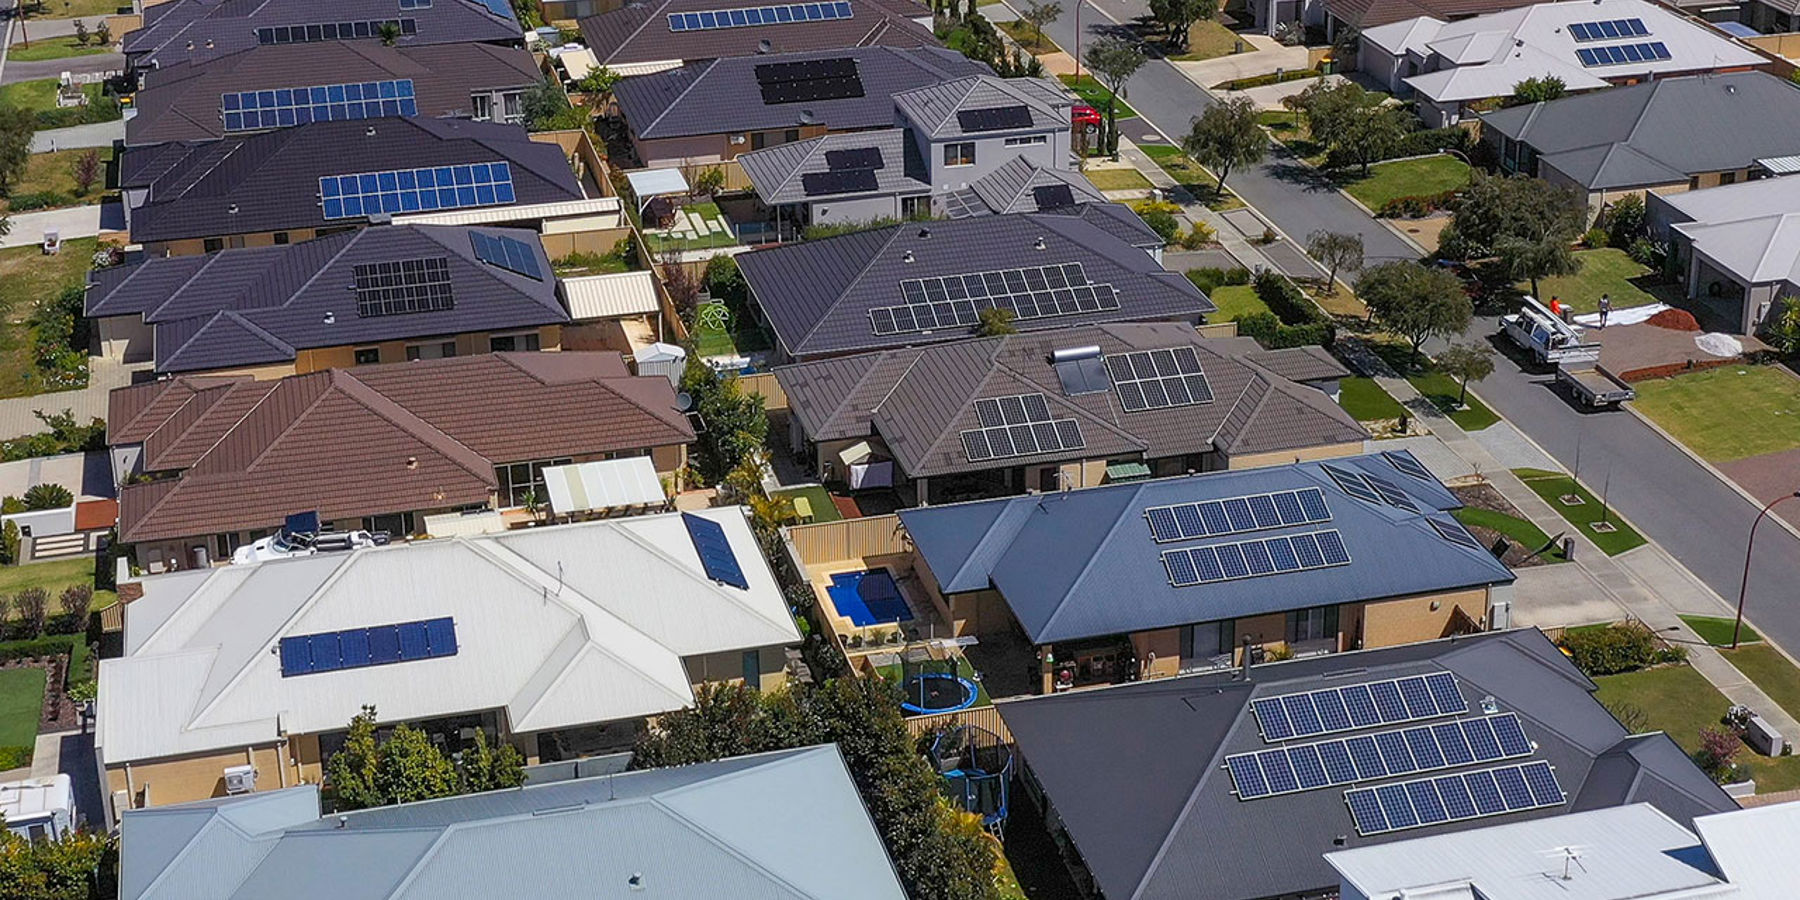 Aerial view of a houses in a suburban street which have solar panels installed on the roof